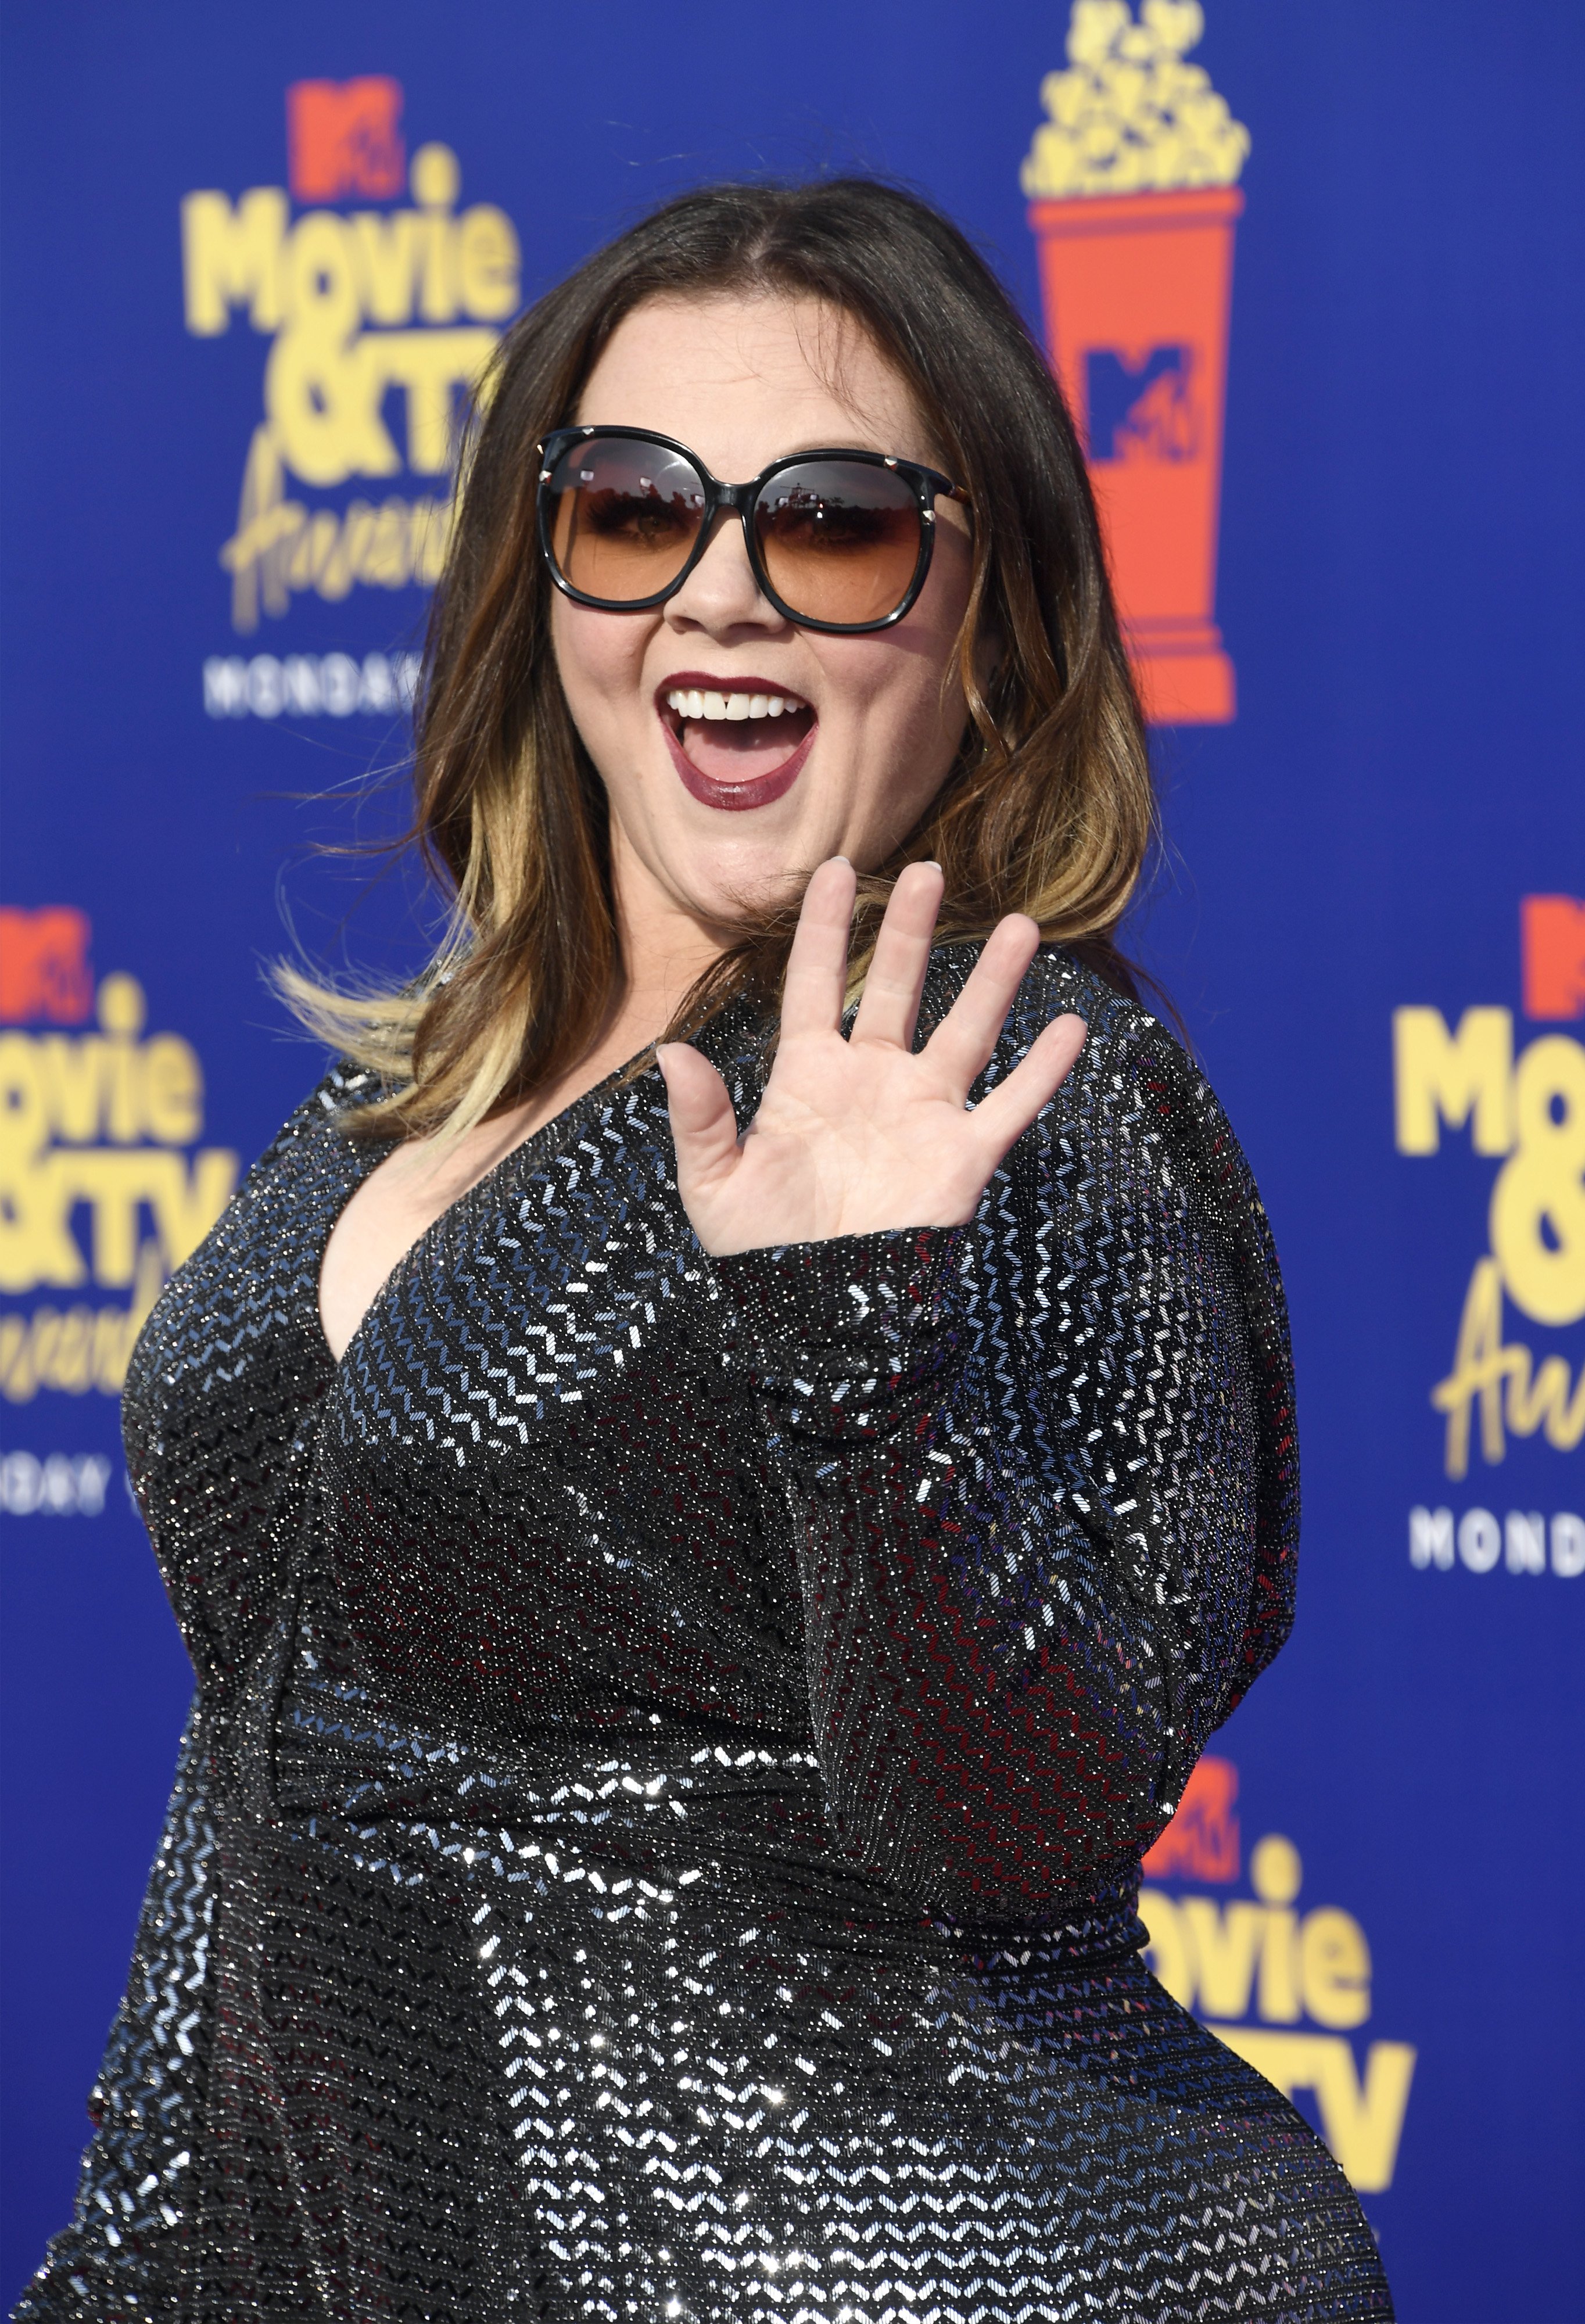 Melissa McCarthy attends the 2019 MTV Movie and TV Awards at Barker Hangar on June 15, 2019 in Santa Monica, California. | Source: Getty Images